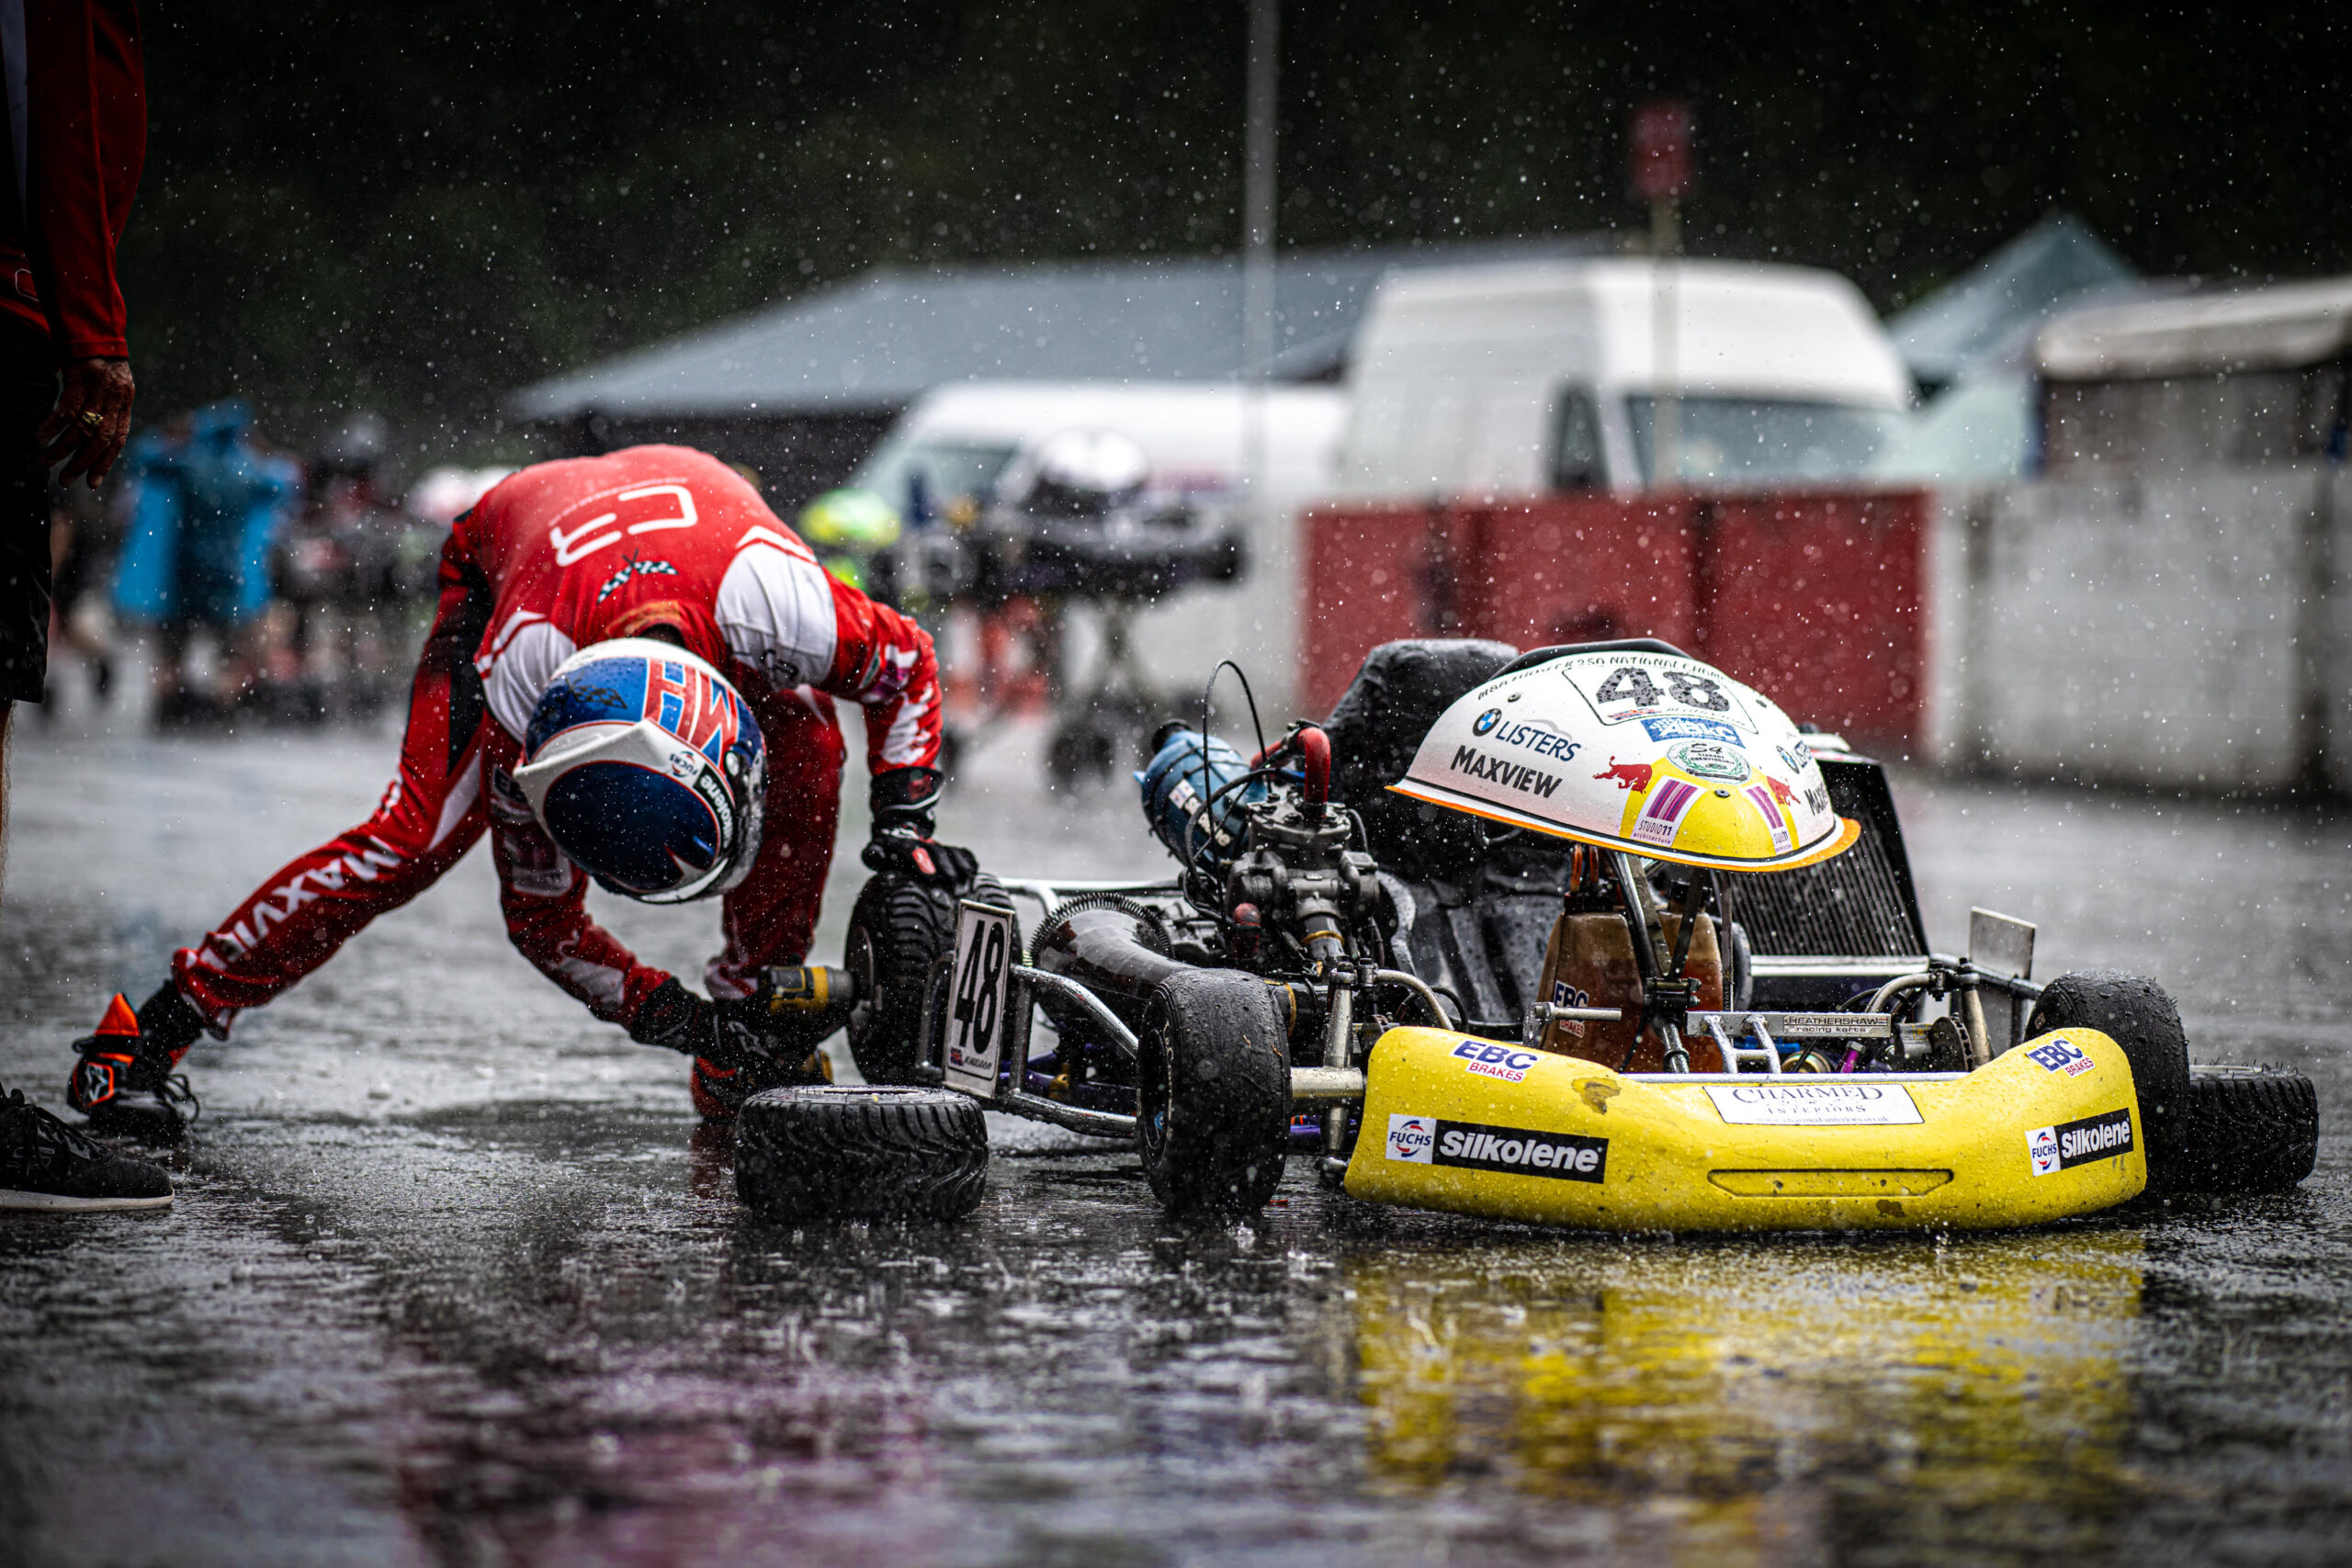 EBC-Equipped Kart Racer Hudson Tackles Treacherous Conditions at Three Sisters